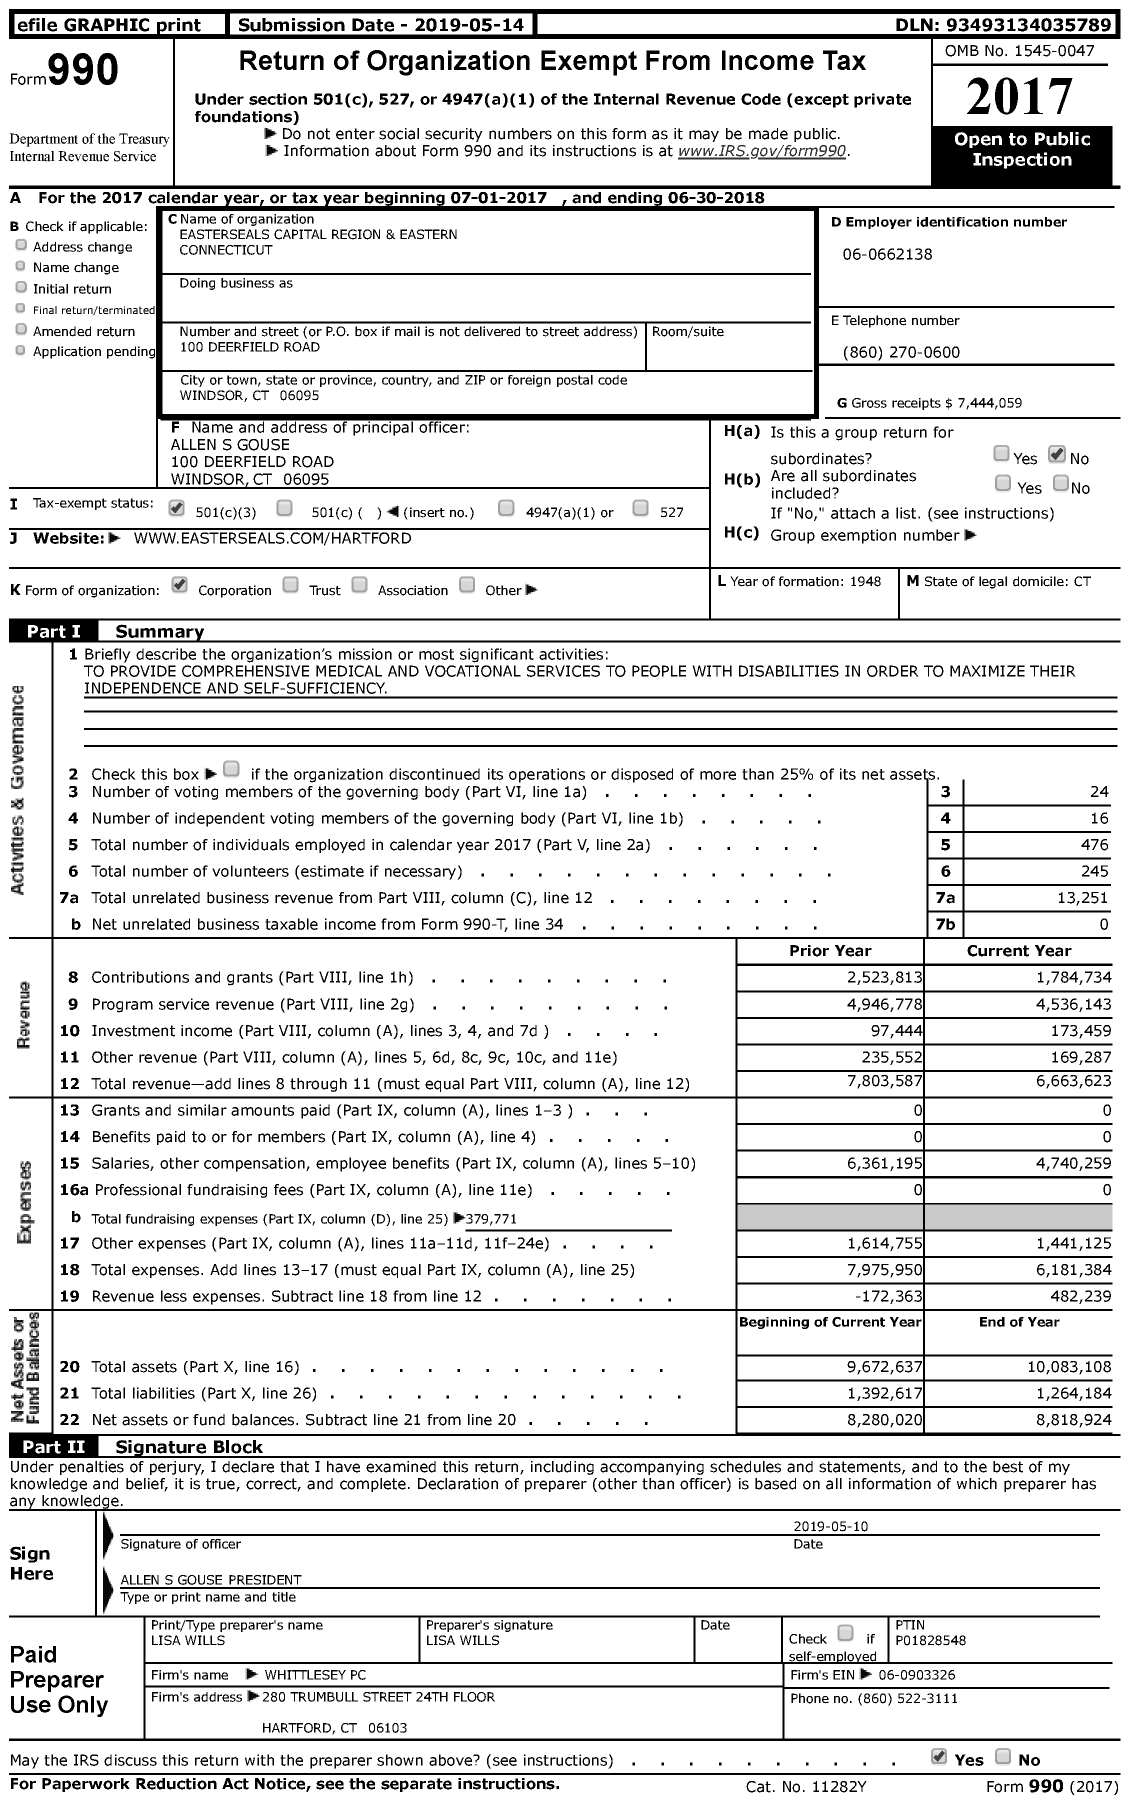 Image of first page of 2017 Form 990 for Easterseals Capital Region and Eastern Connecticut